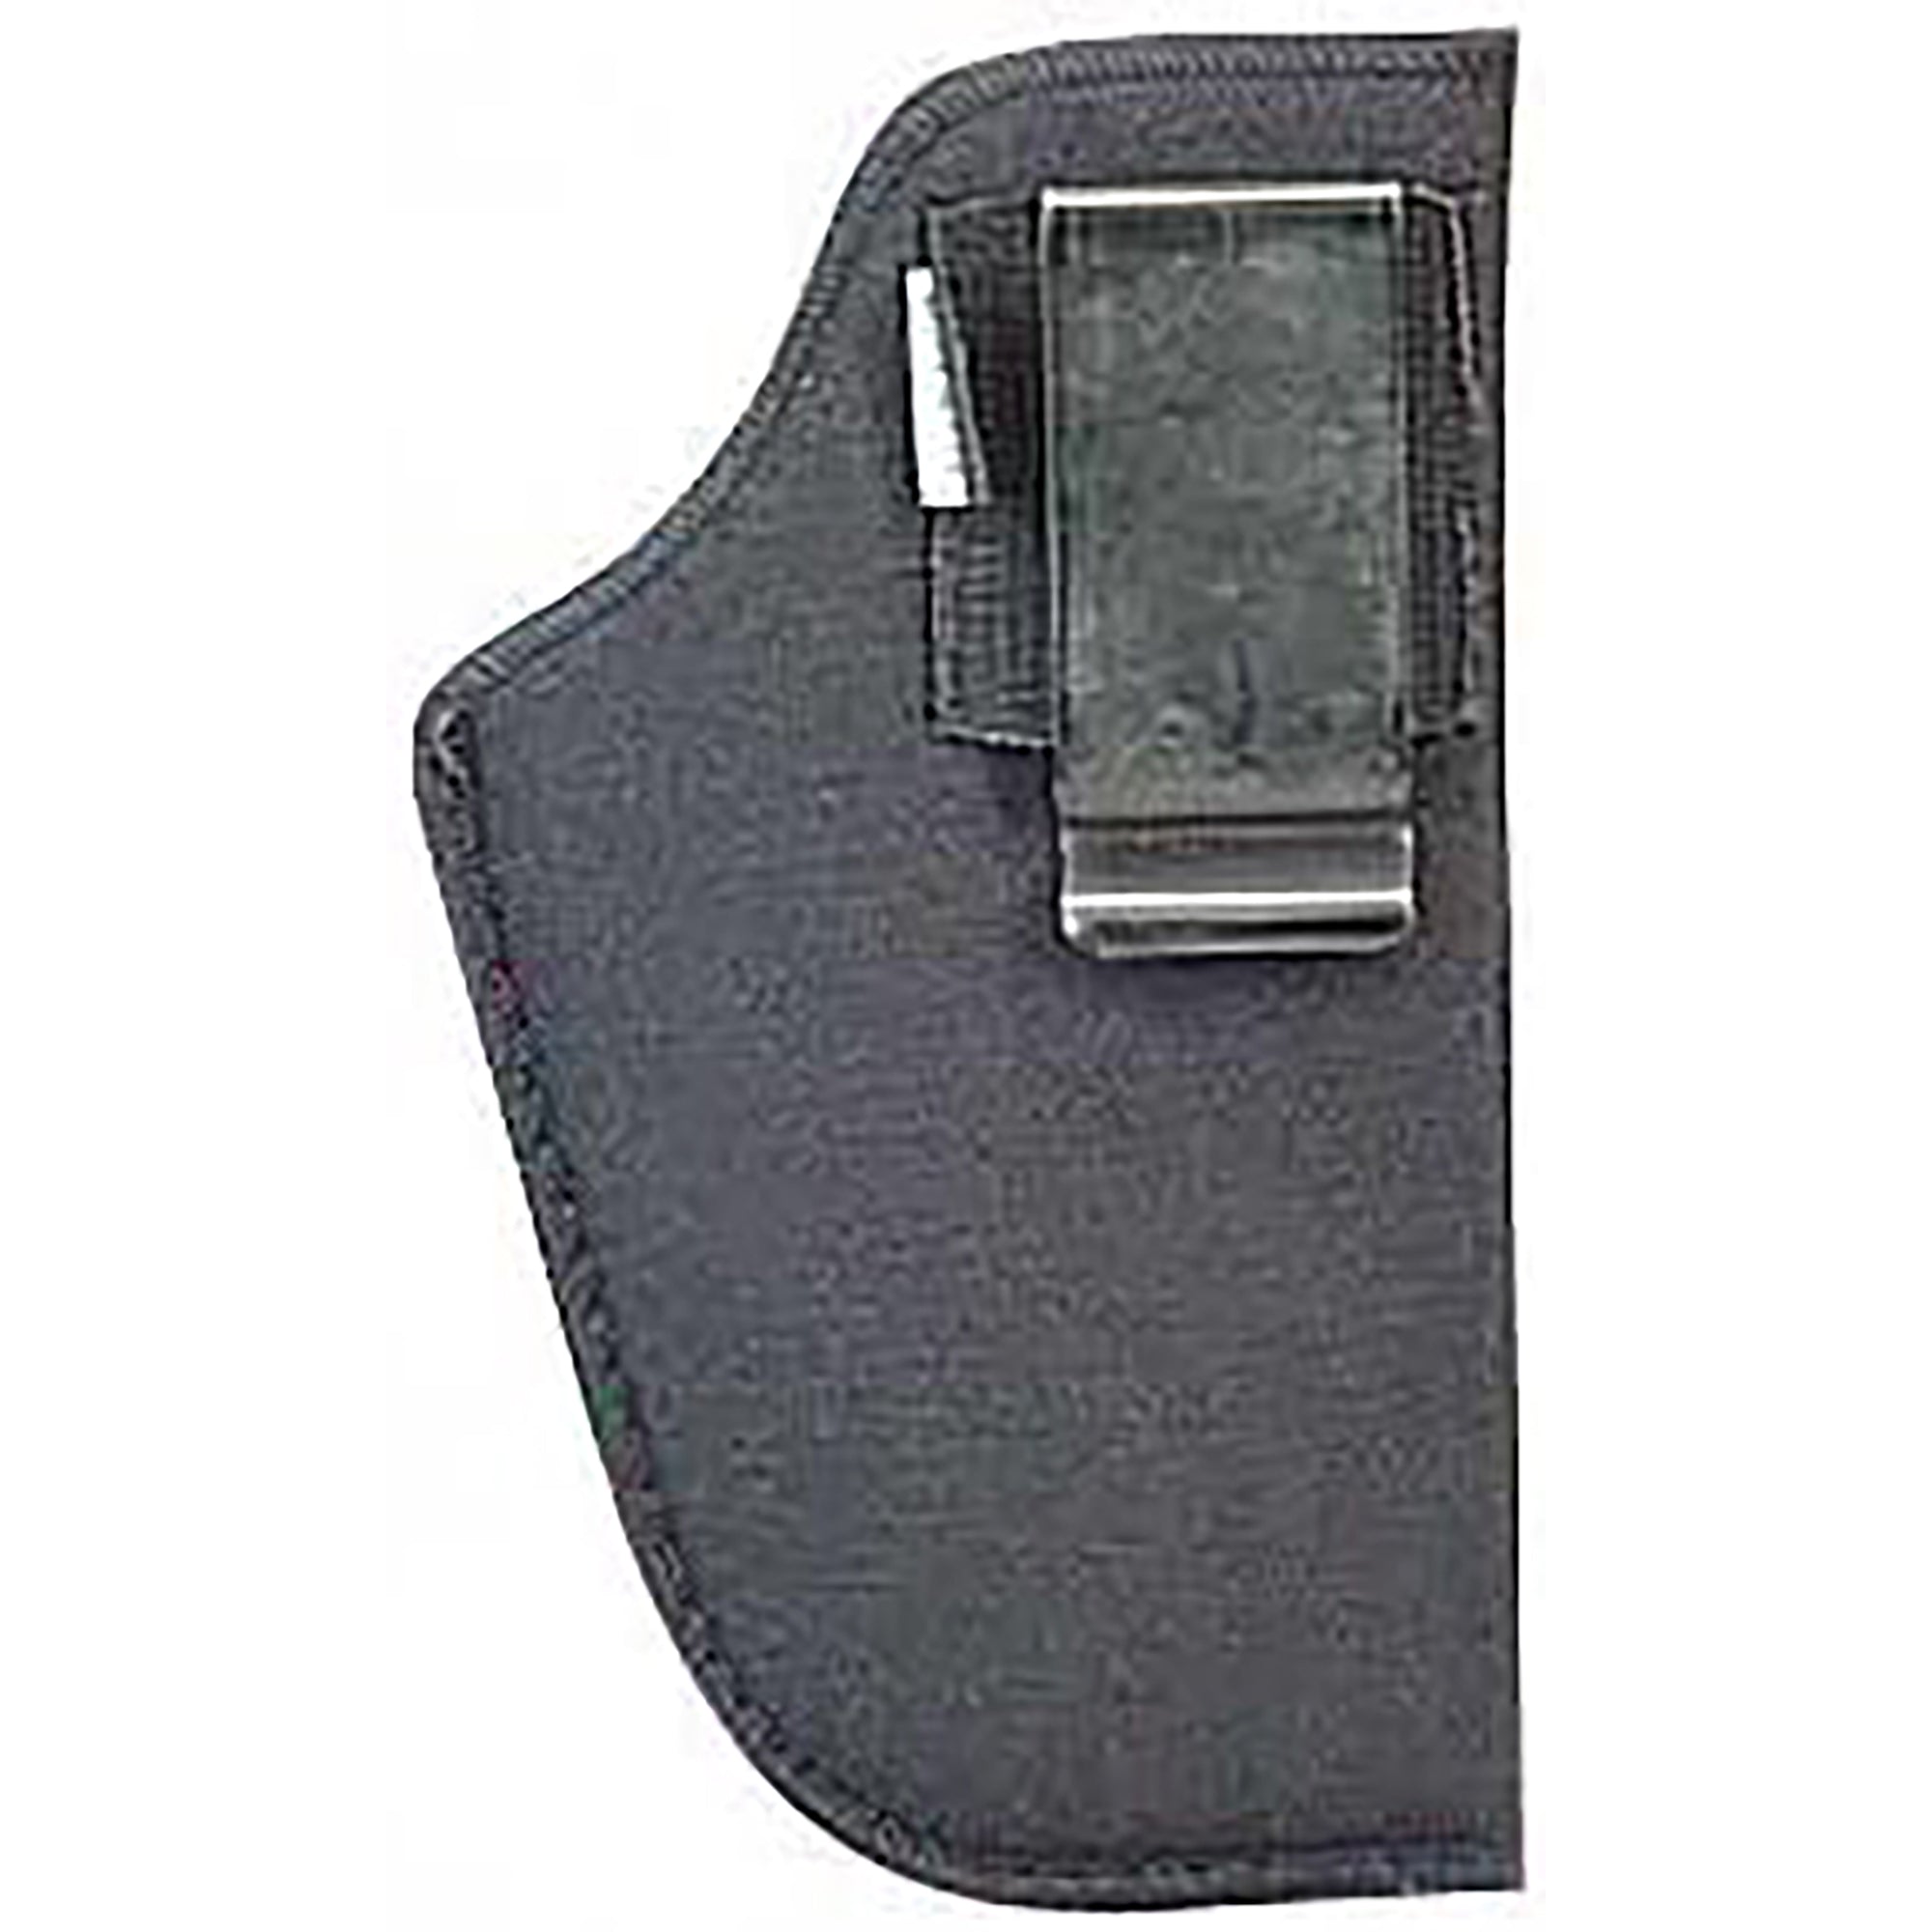 GunMate Inside-The-Pants Right-Handed Hip Holster - Size 10 - Black GunMate